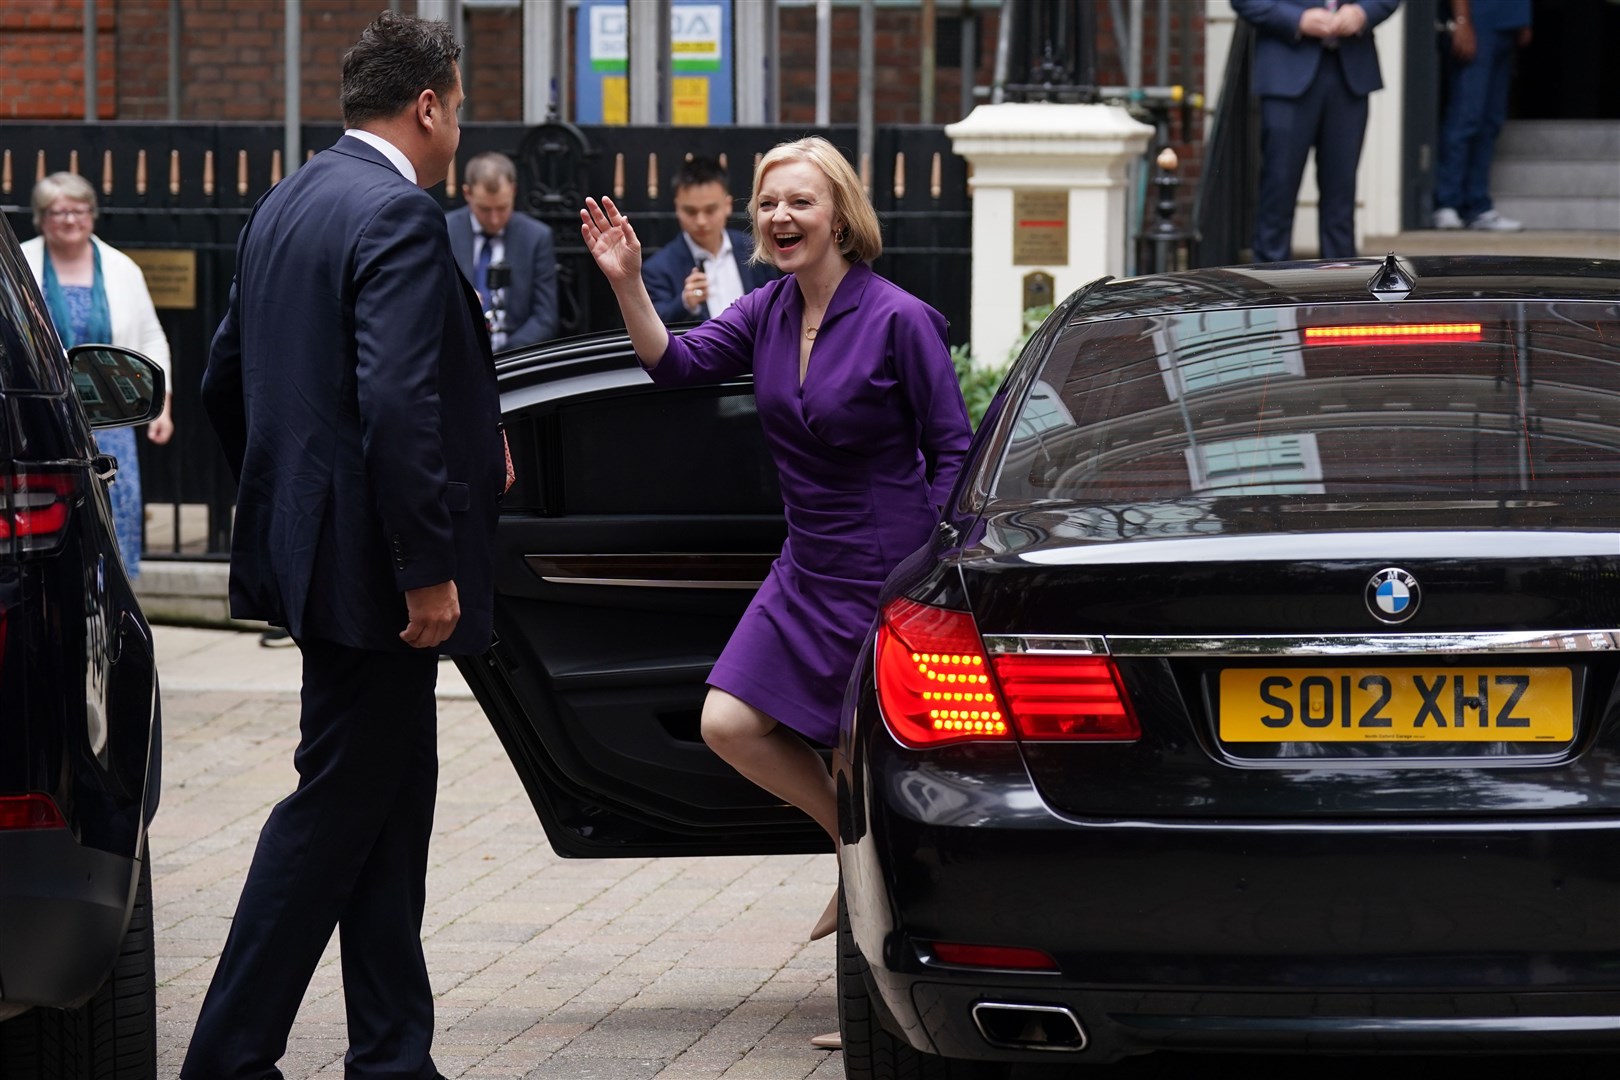 Liz Truss arriving at the Conservative Campaign Headquarters in London after her victory in the leadership contest (Kirsty O’Connor/PA)